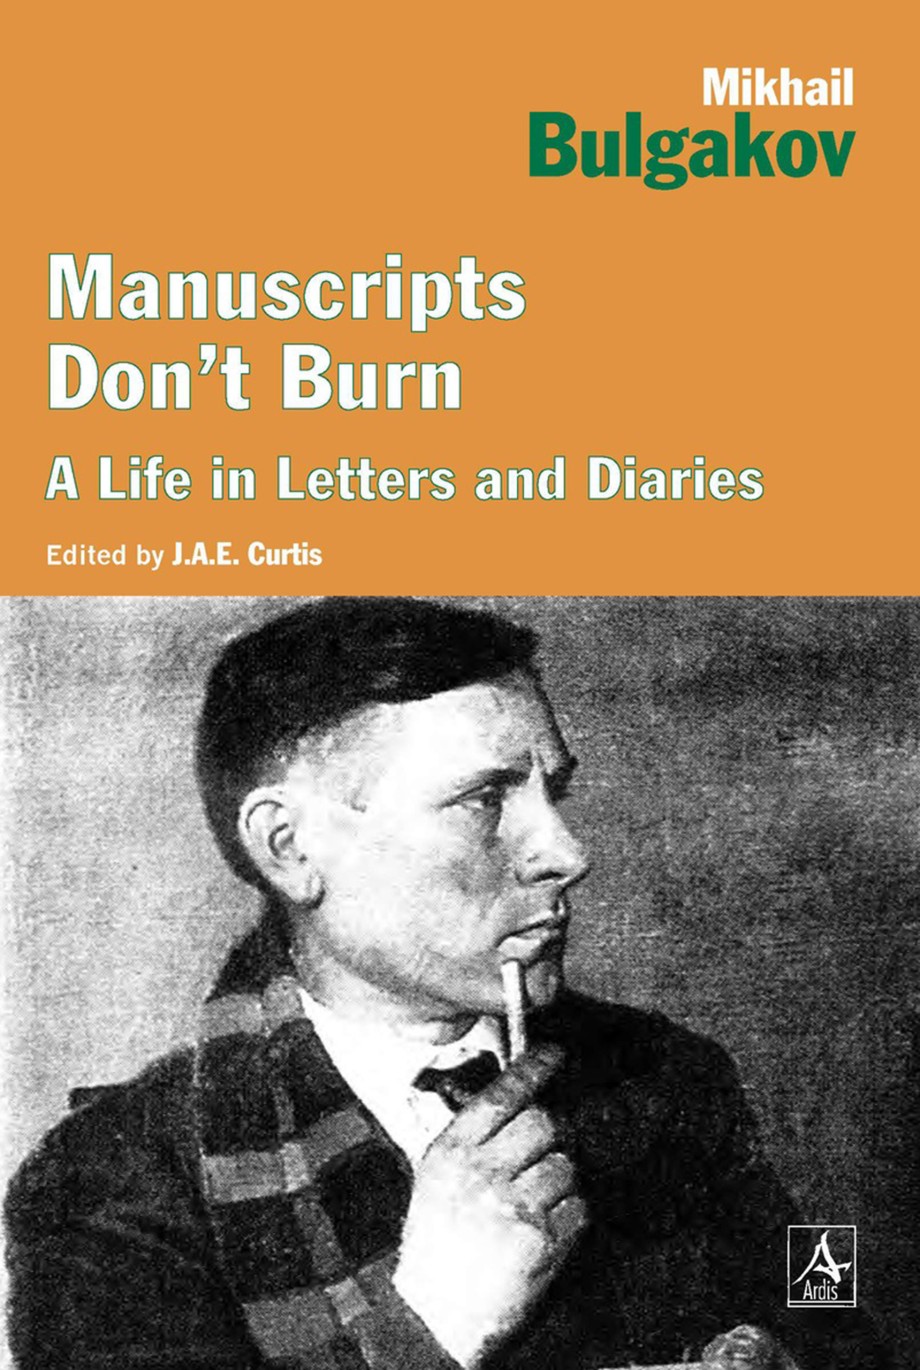 Manuscripts Don't Burn Mikhail Bulgakov A Life in Letters and Diaries